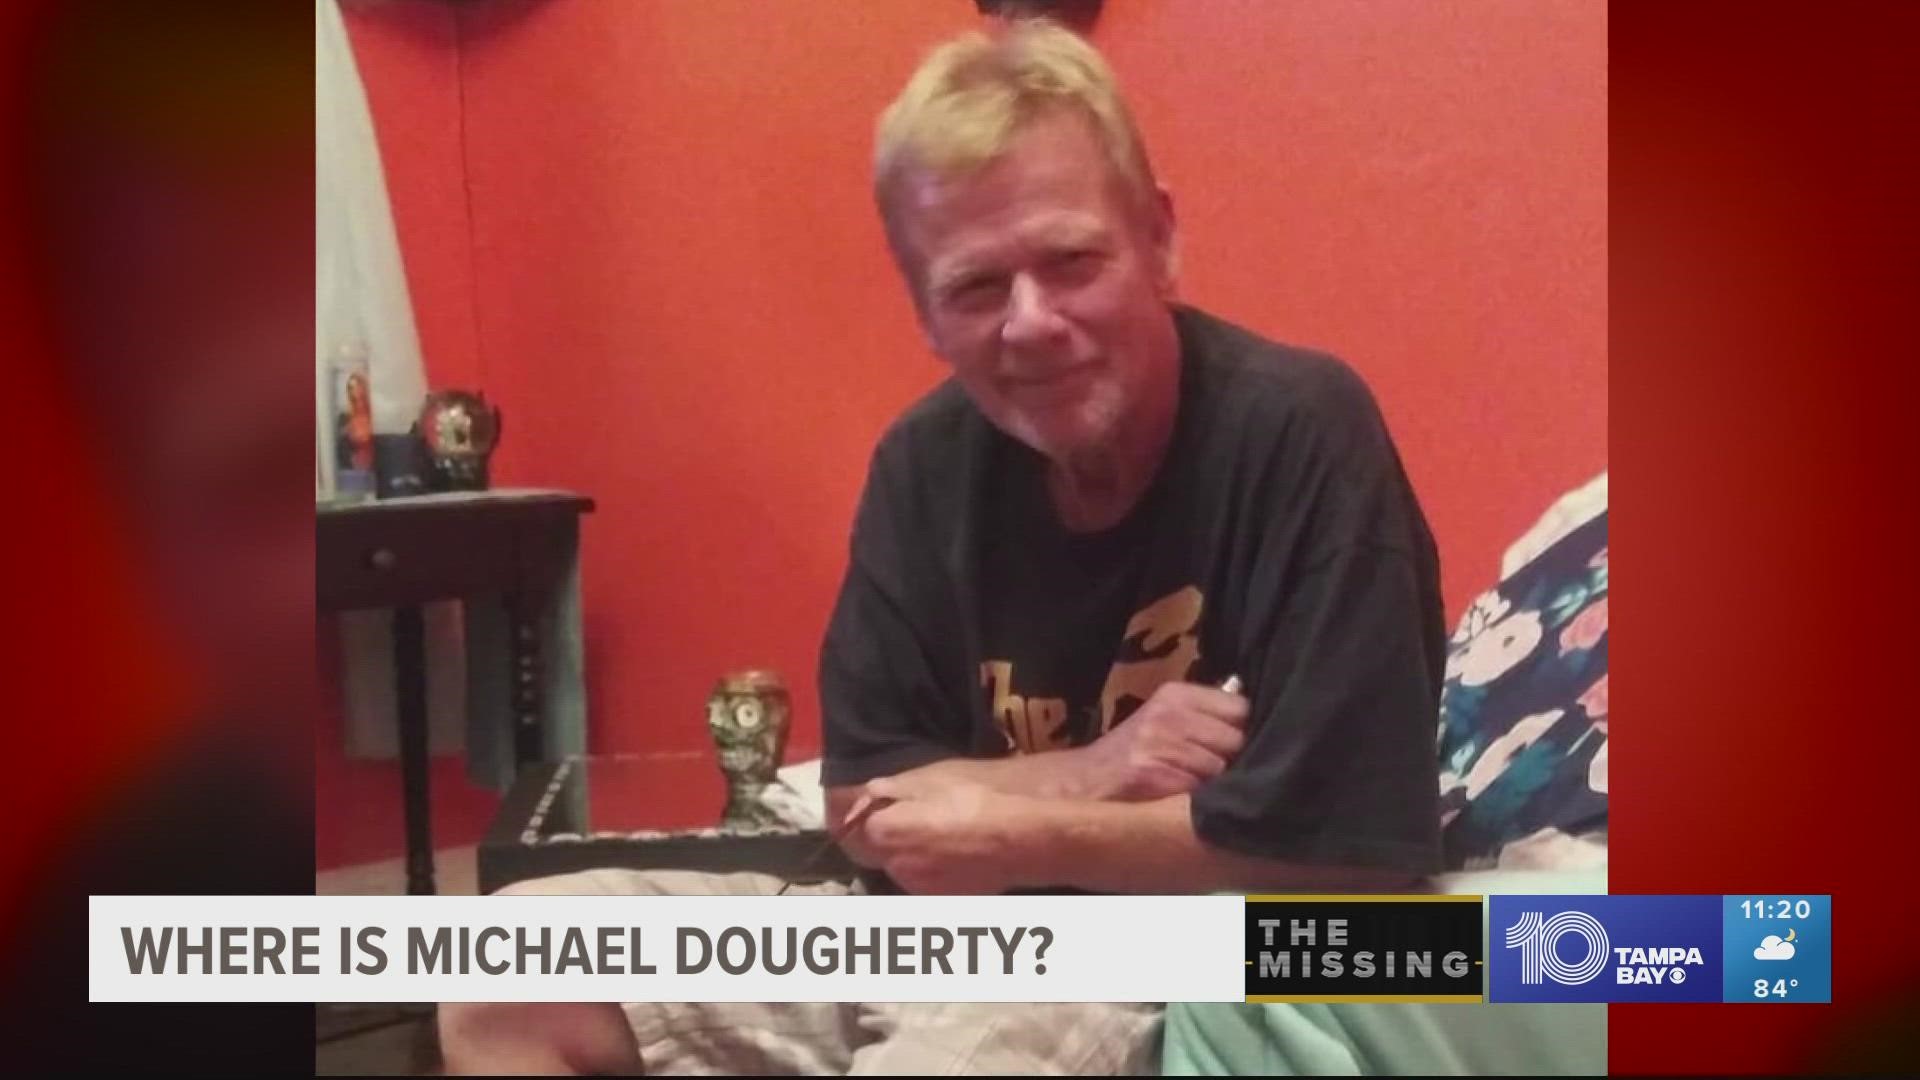 Where is Michael Doughtery? He was last heard from on Jan. 17, 2022.